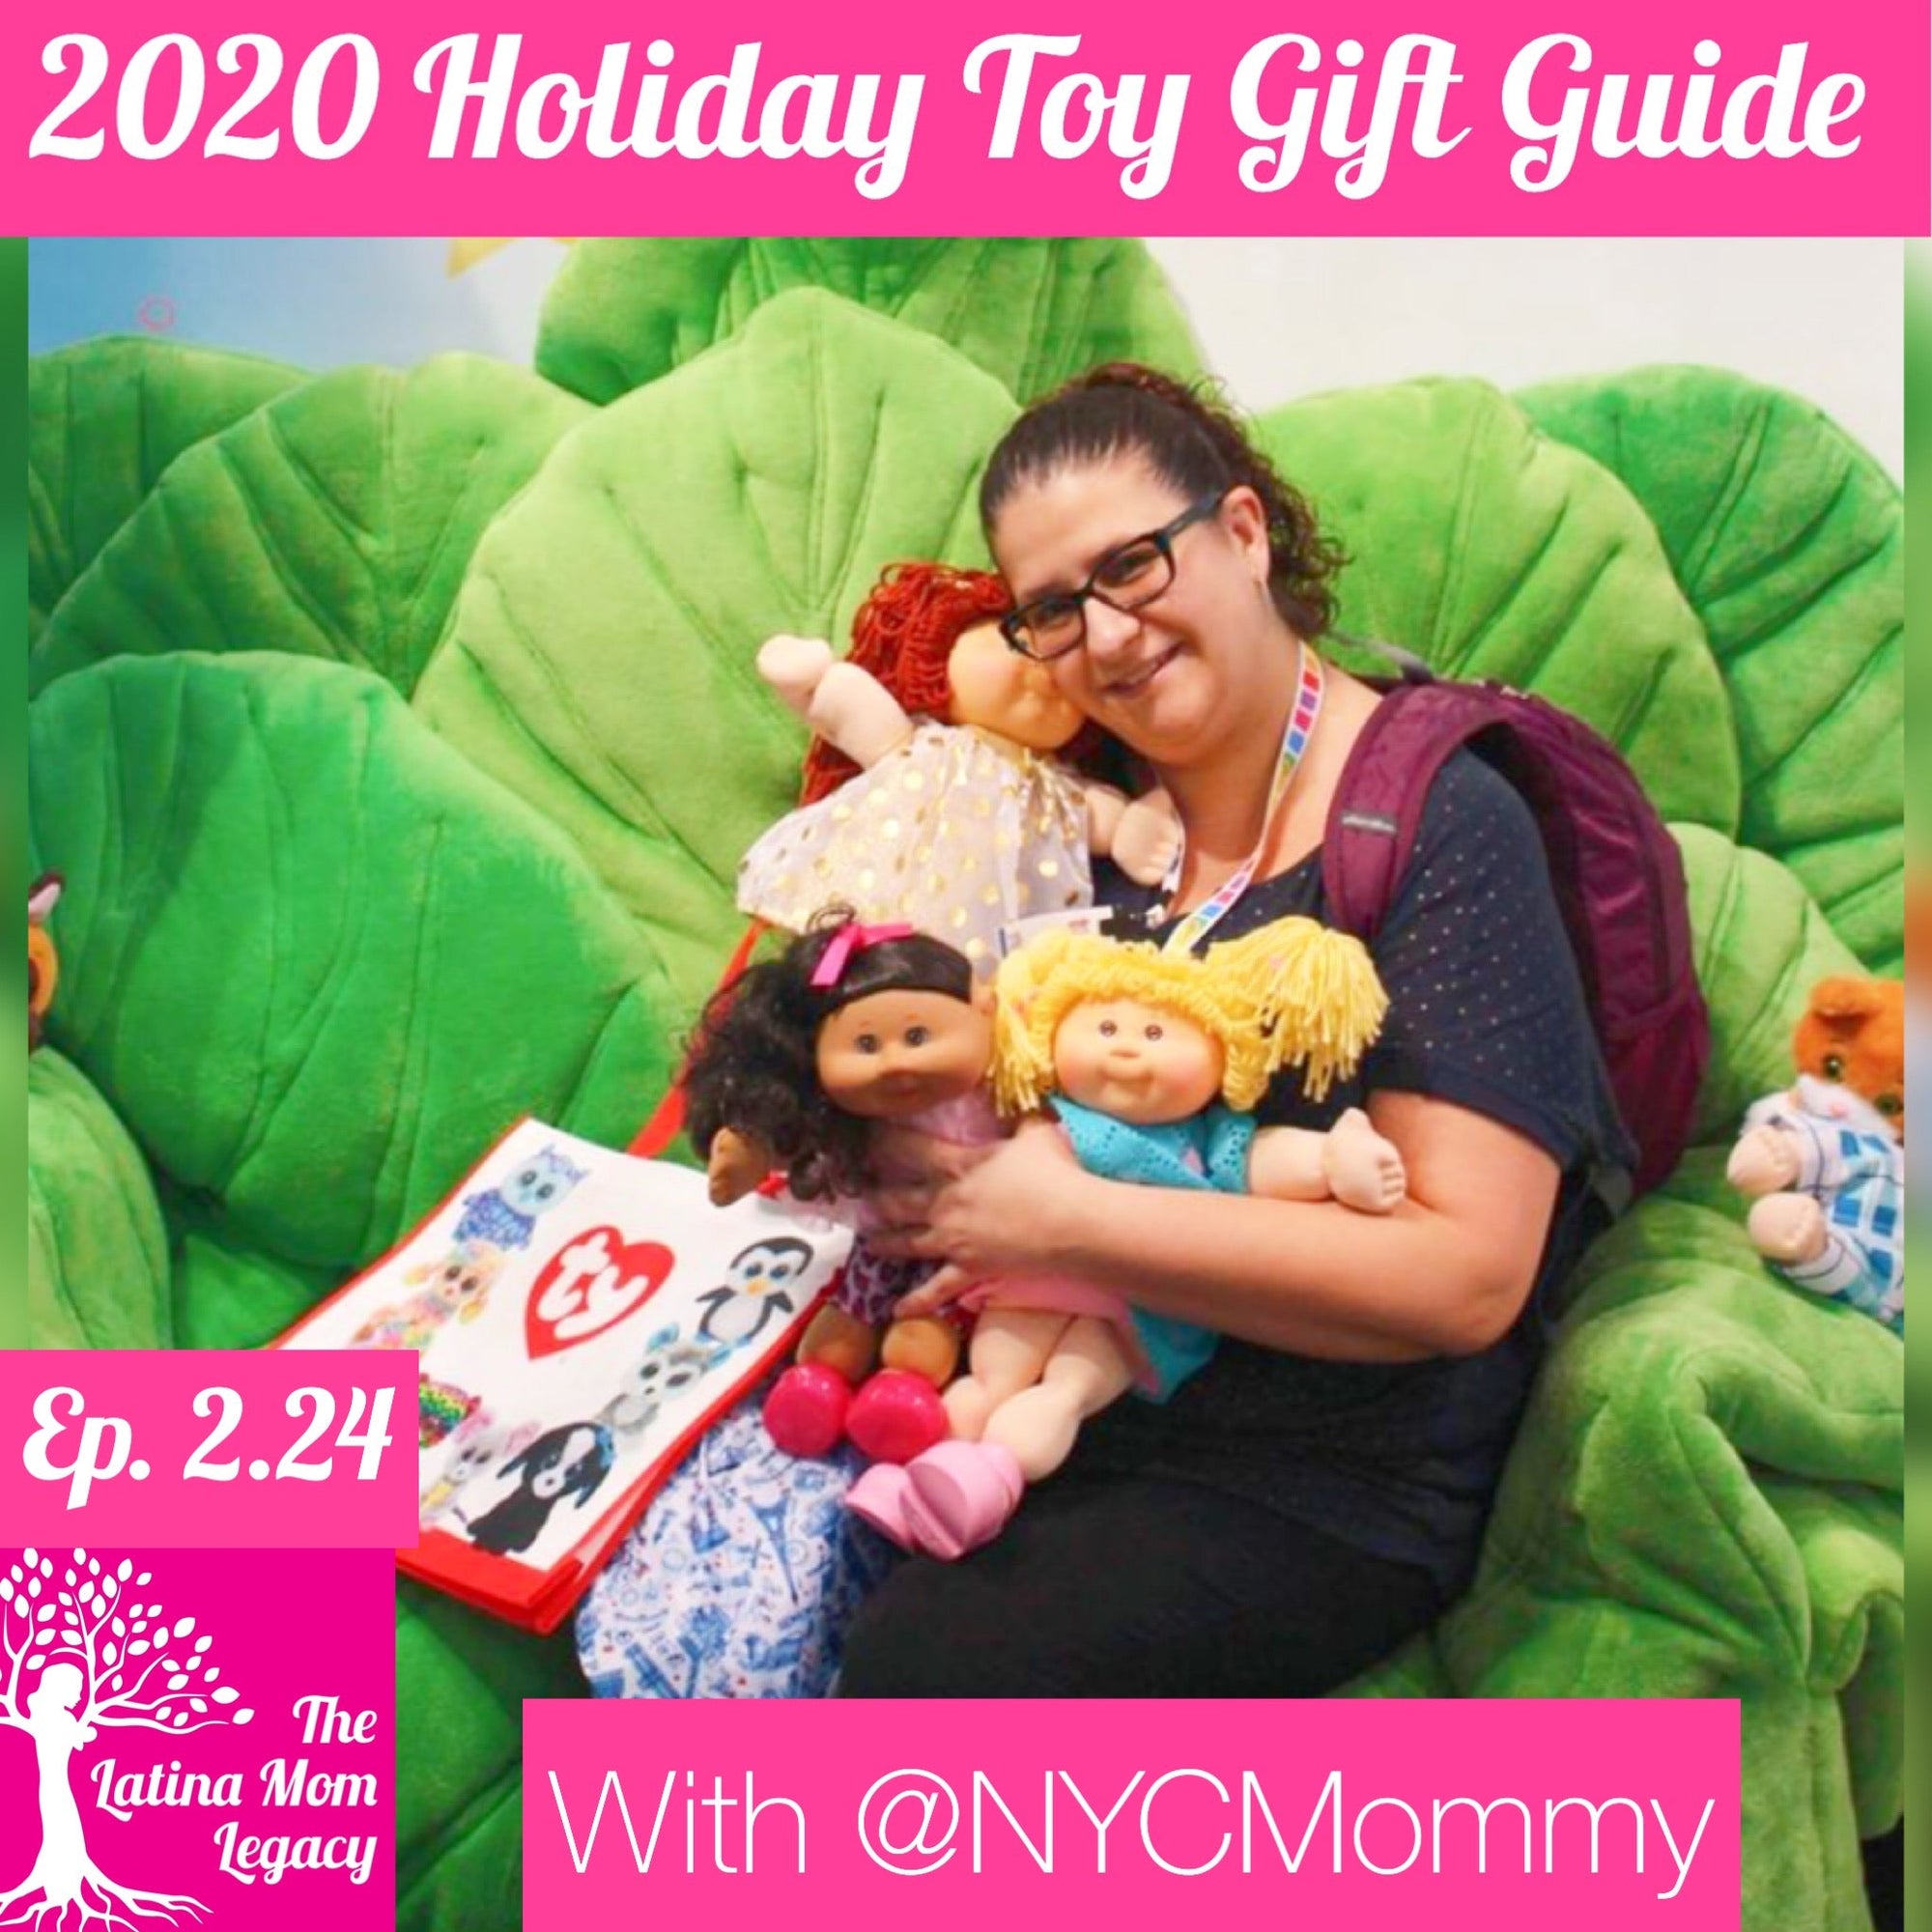 2.24 Monica Encarnación - 2020 Toy Gift Guide - What to Get Kids for Christmas in 2020?? - Mi LegaSi